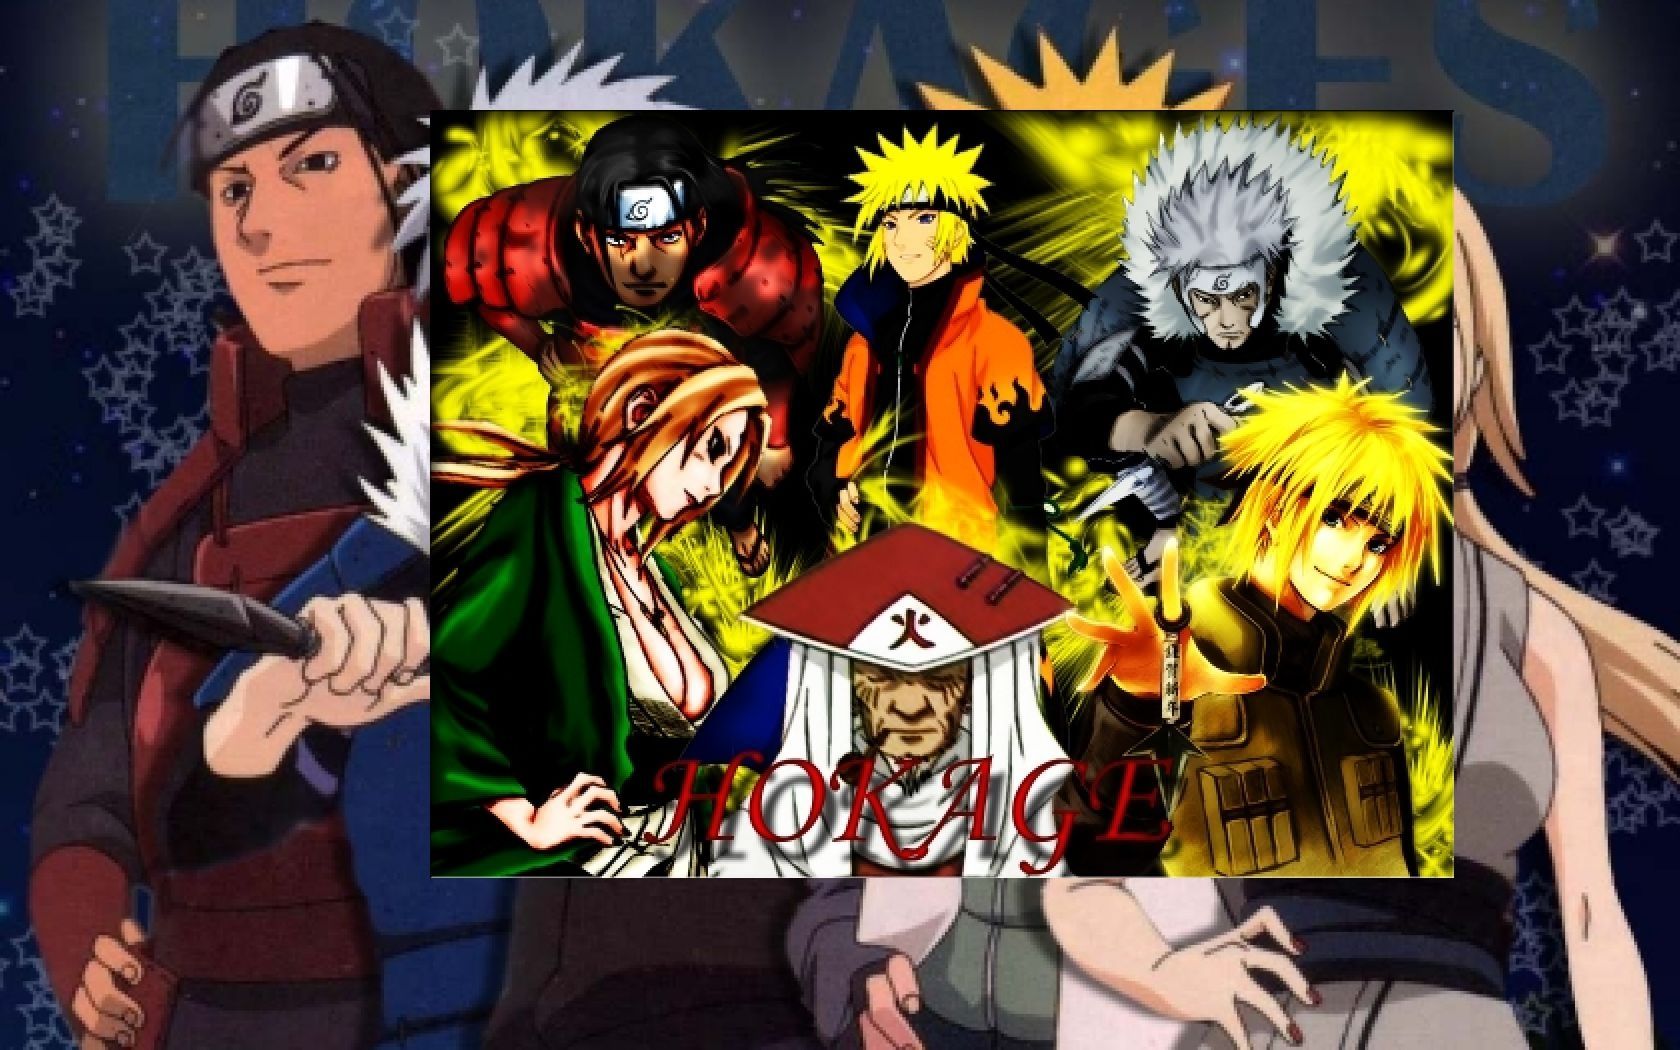 1680x1050 Free Download Hokages Wallpaper Page 2 1680x1050 For Your Desktop Mobile Tablet Explore Naruto Shippuden Wallpaper Hokage Naruto Shippuden Wallpaper Hokage Hokage Naruto Wallpaper Naruto Shippuden Wallpaper